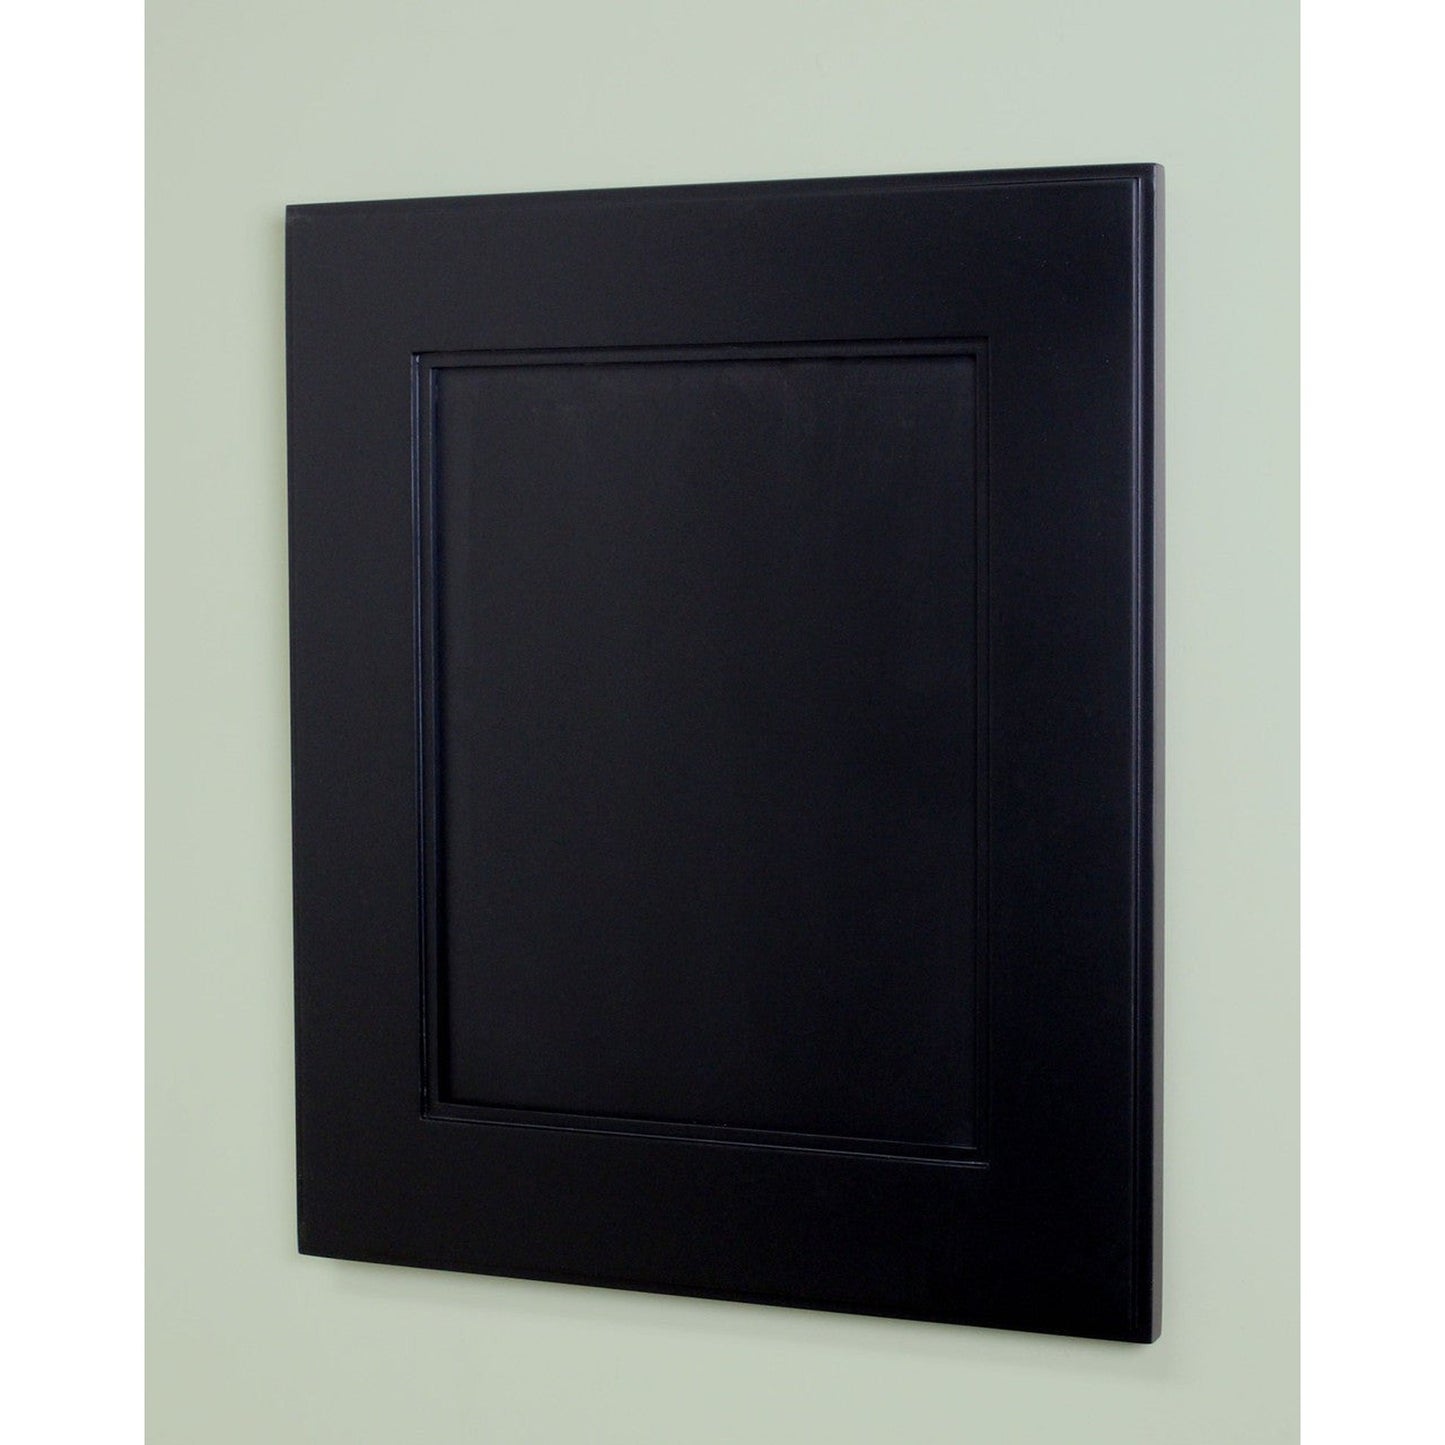 Fox Hollow Furnishings 14" x 18" Black Shaker Style Special 3" Depth White Interior Recessed Medicine Cabinet